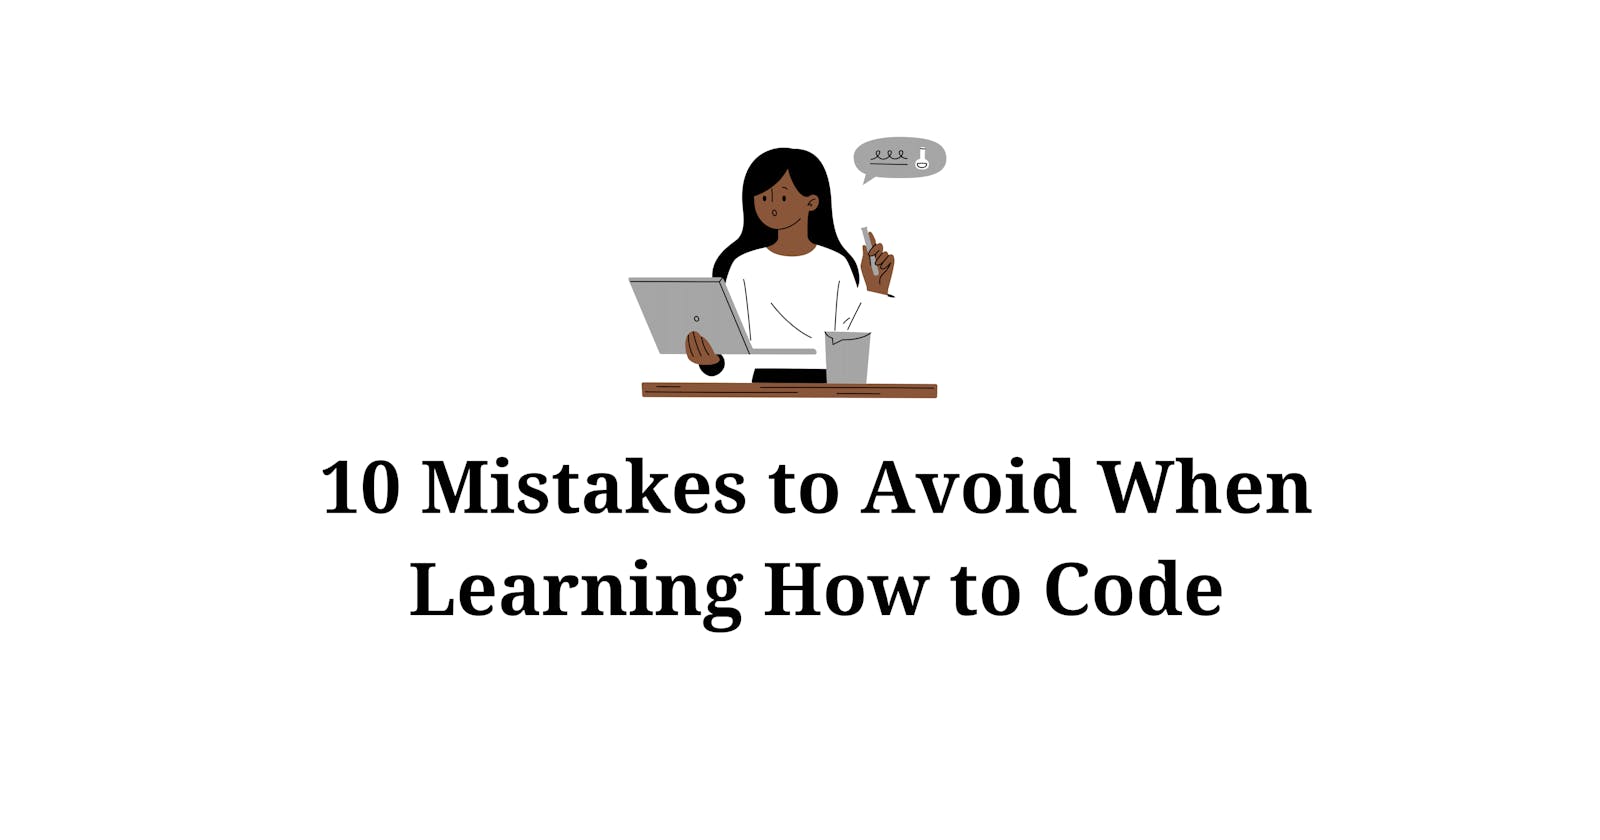 10 Mistakes to Avoid When Learning How to Code